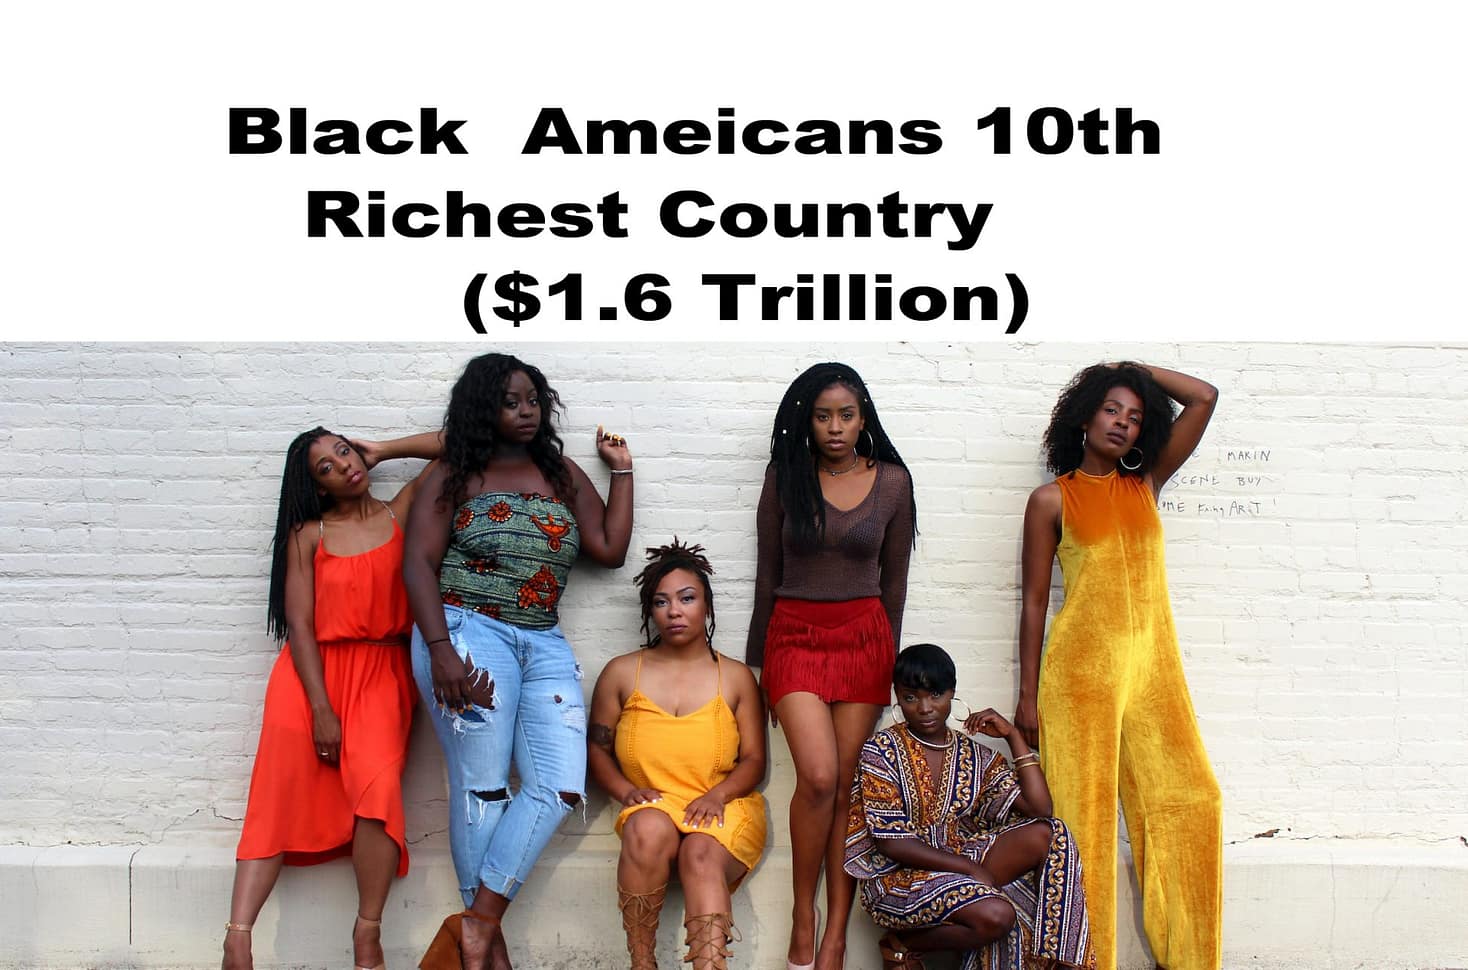 Black Americans Have a one and a half trillion dollar spending power